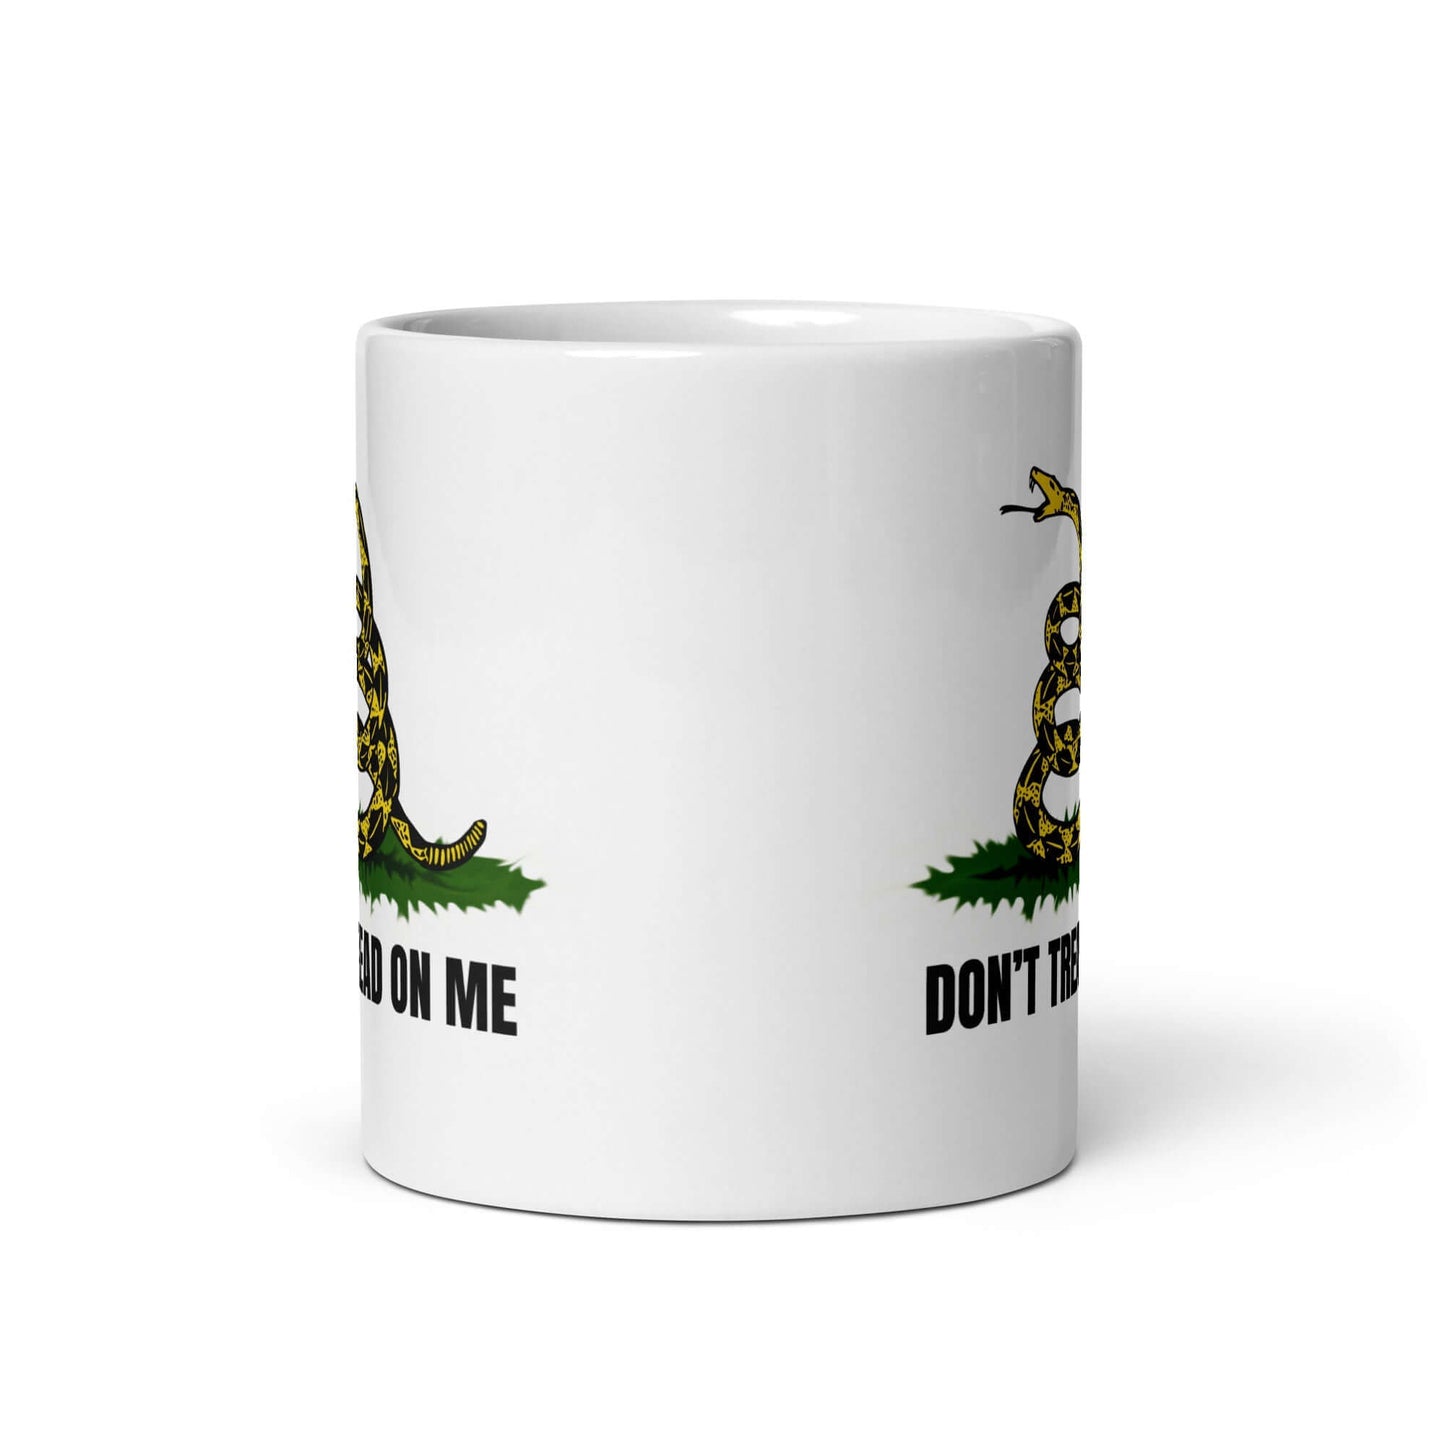 Don't tread on me - White glossy mug 2nd amendment 4th of july agorism constitution dont tread on me freedom gadsden libertarian liberty liberty snake original intent second amendmnet voluntary